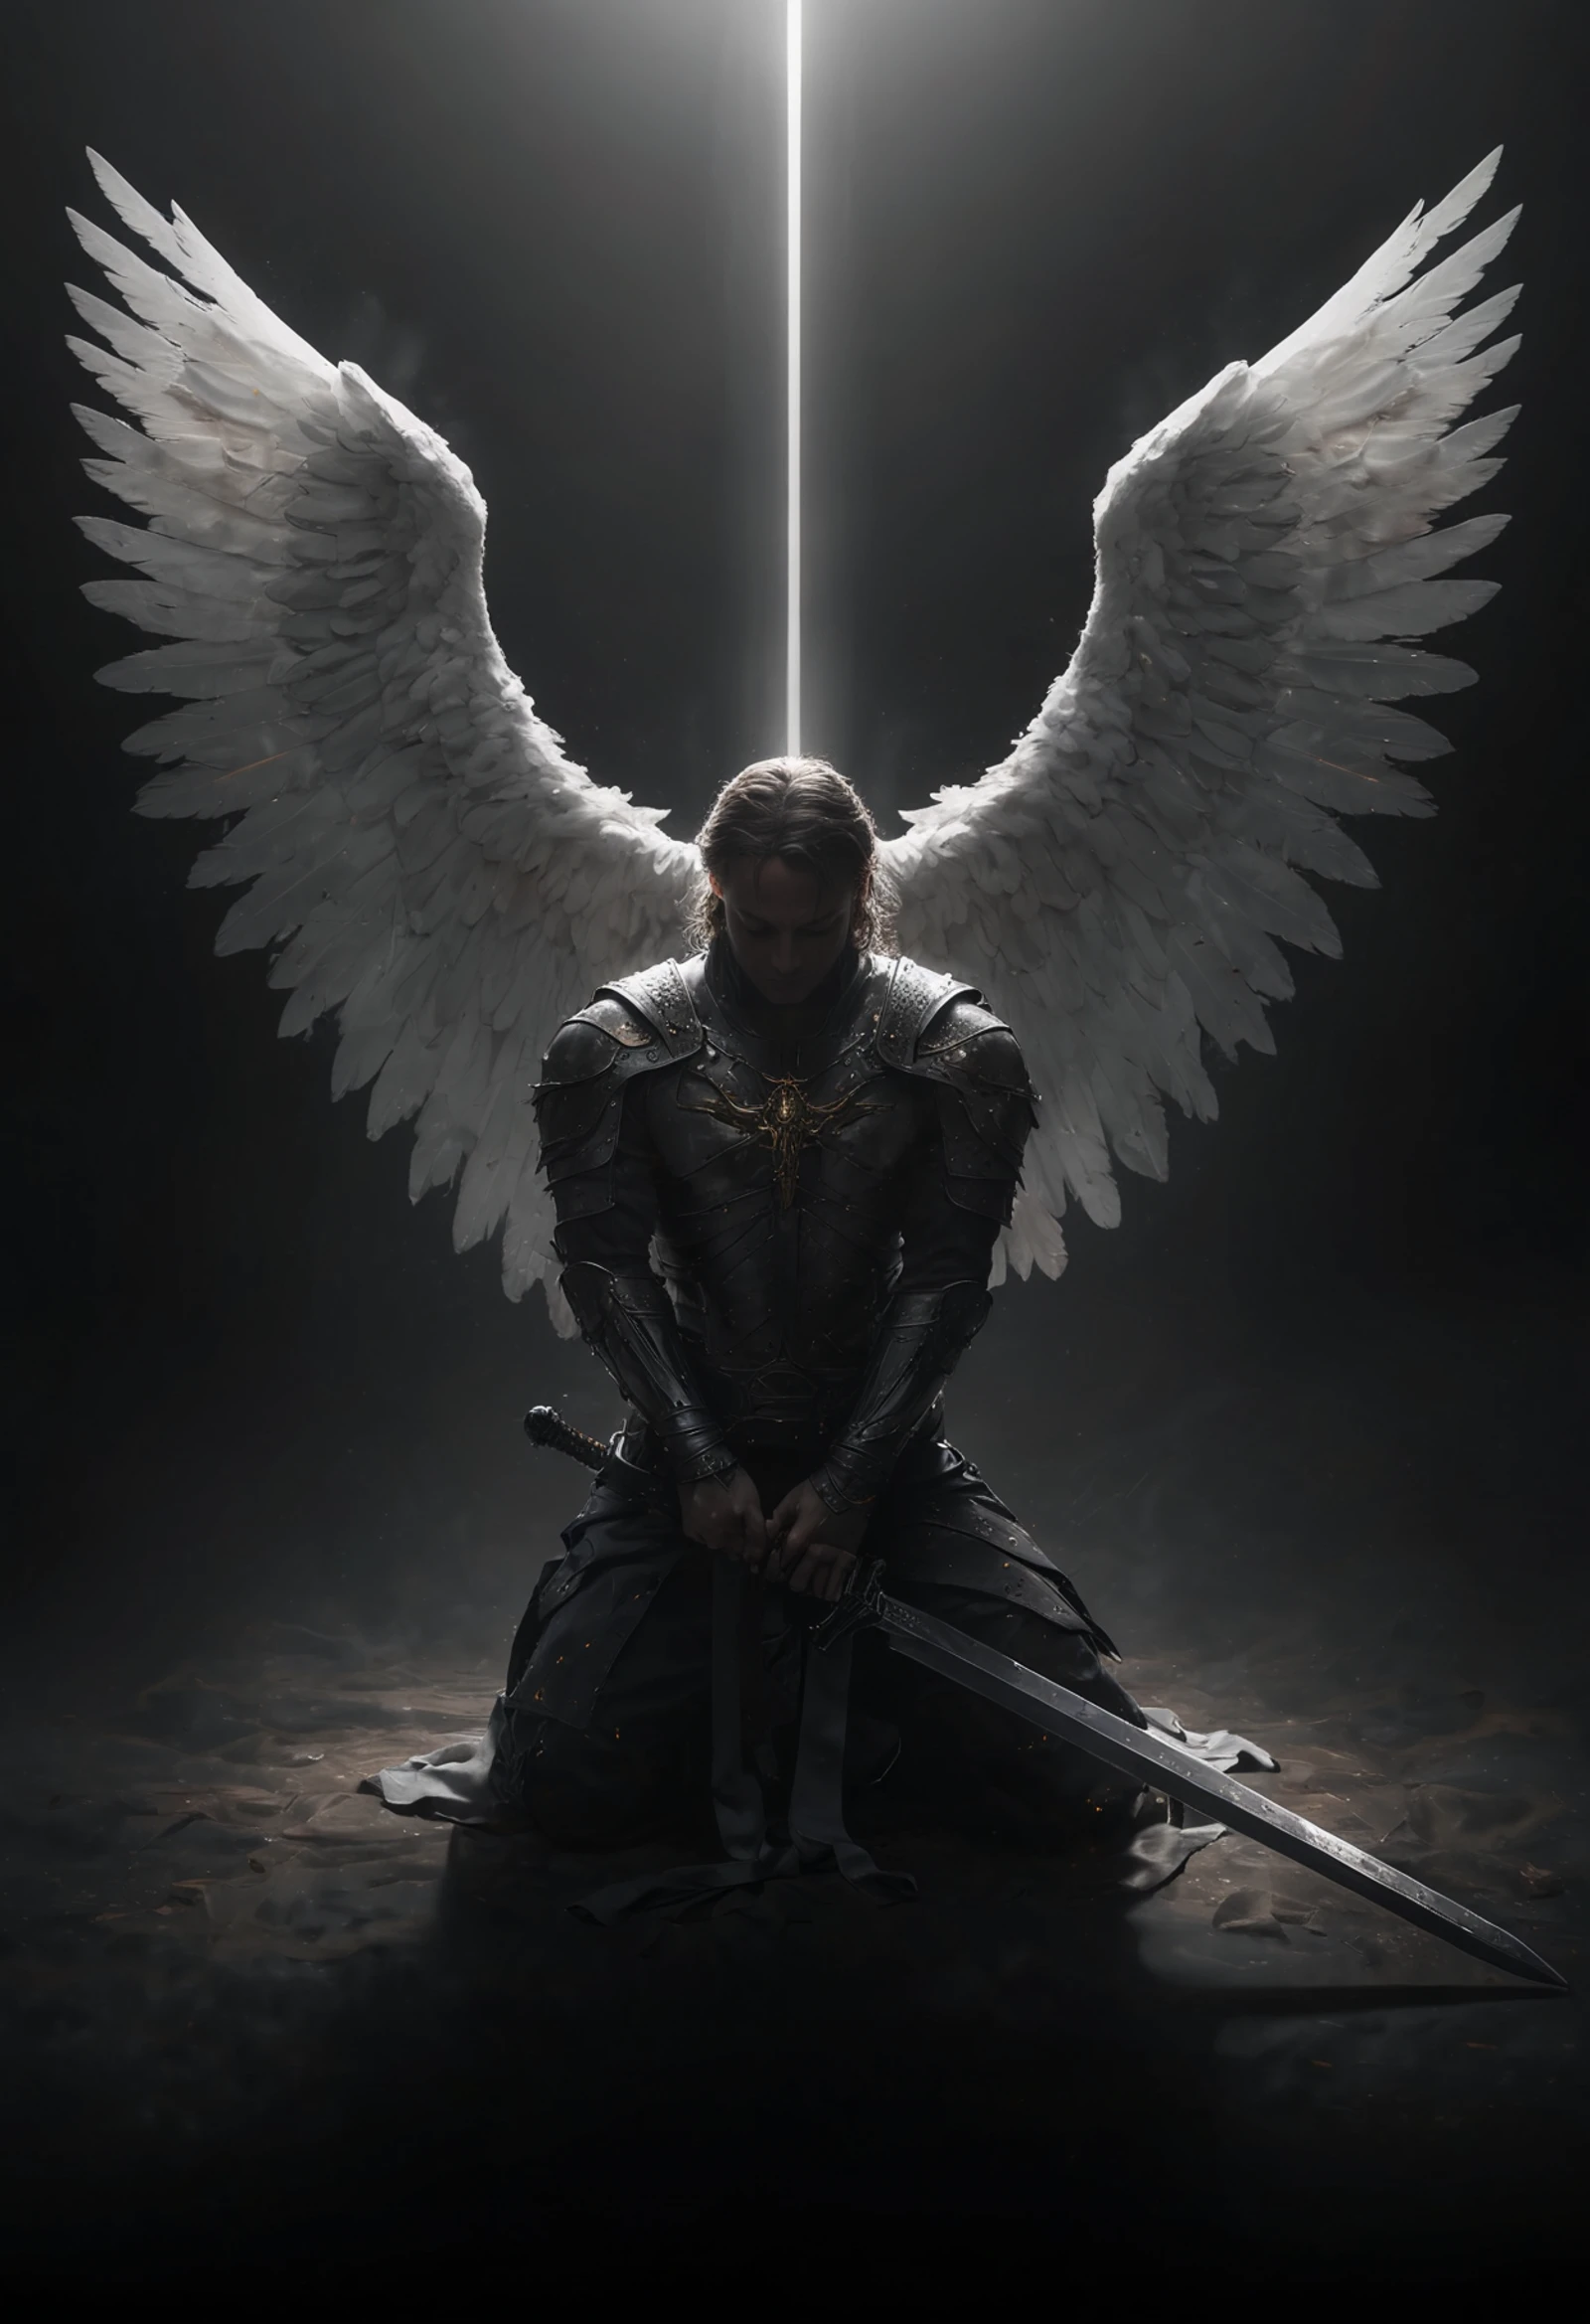 angelic warrior praying to God,closed eyes,big wings,kneeling with one (hand gripping the greatsword plunged into the ground:1.2),divine light,serene atmosphere,celestial presence,detailed portrayal,dynamic composition,highly detailed photo,sharp details,dark church,light reflects along the bodyline,dark tone,